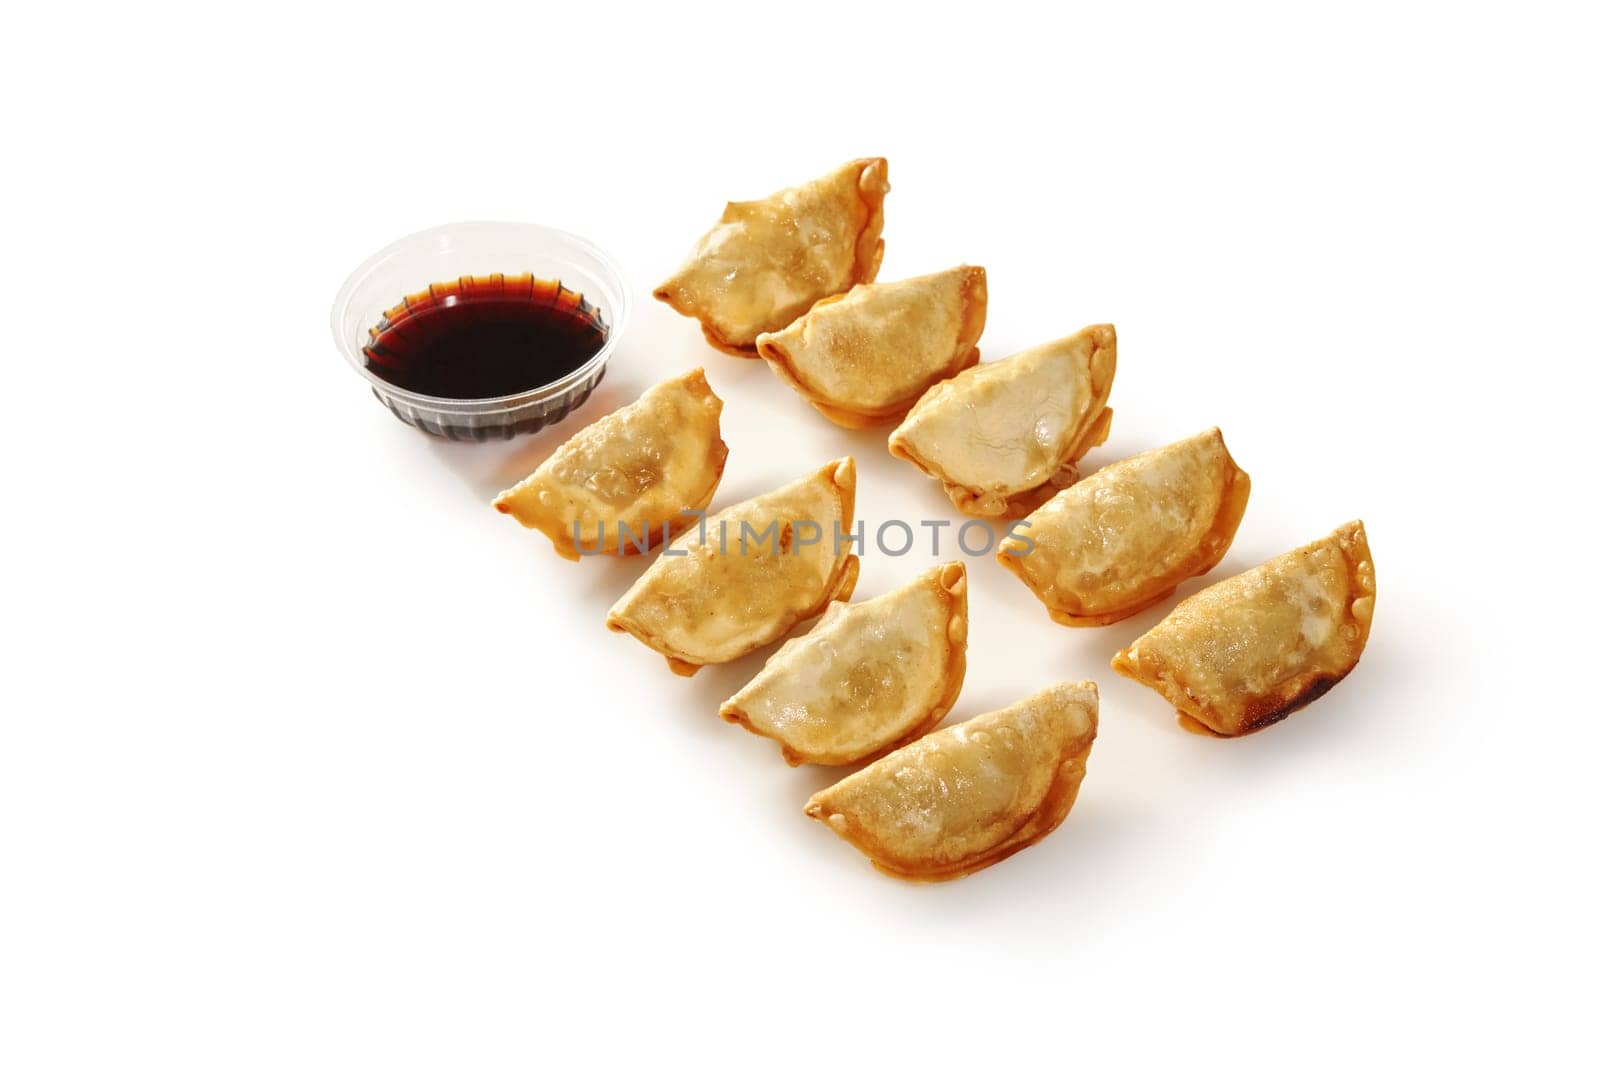 Appetizing golden gyoza, crispy pan-fried dumplings with savory filling traditionally served with cup of soy sauce, isolated on white background. Japanese style street food